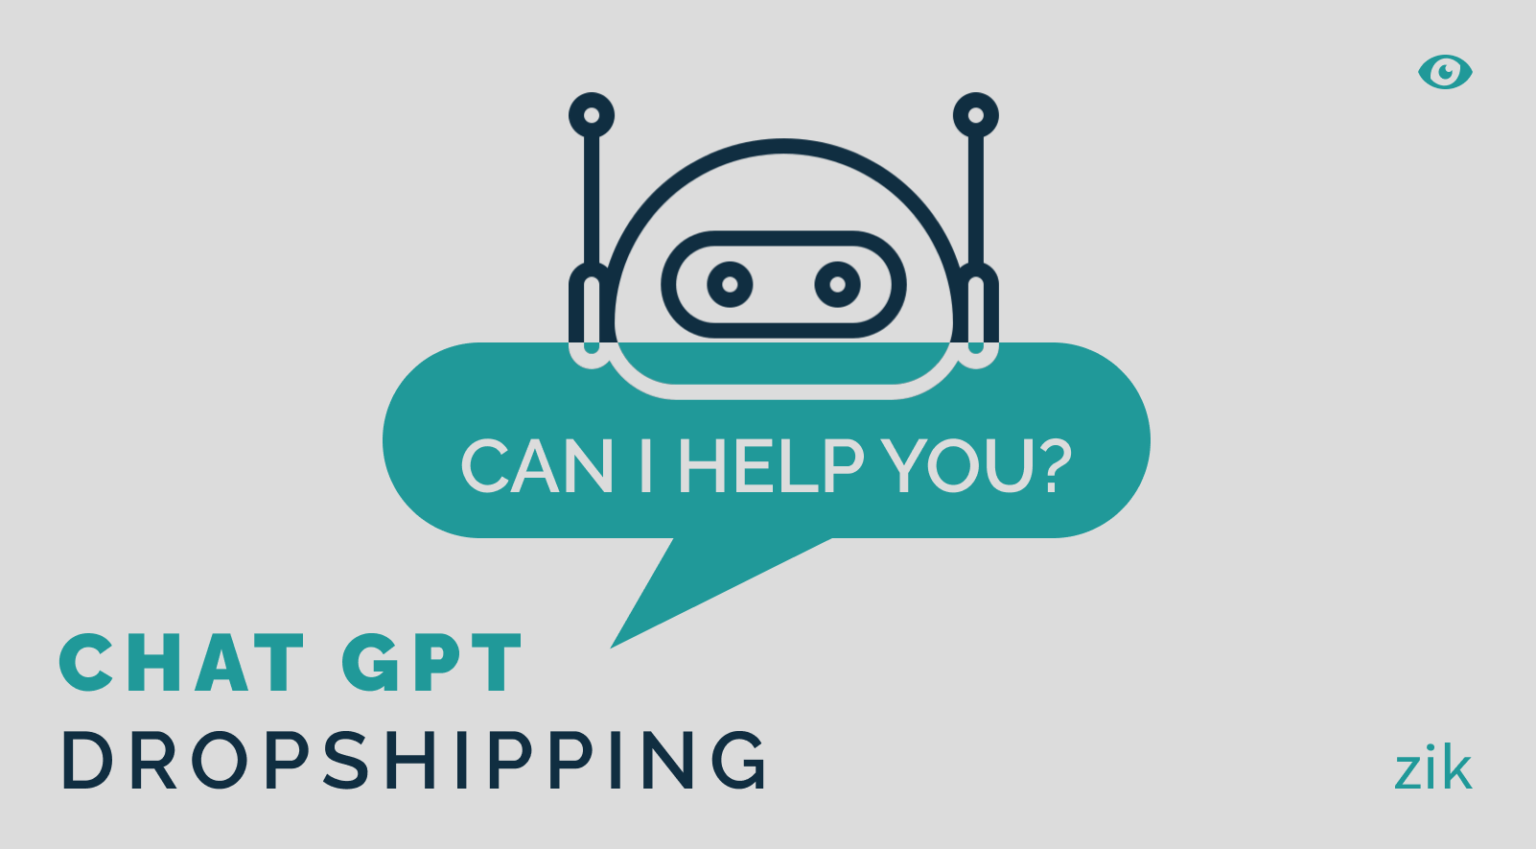 GPT-4 can be used for FREE using this simple hack. Follow these 3 steps